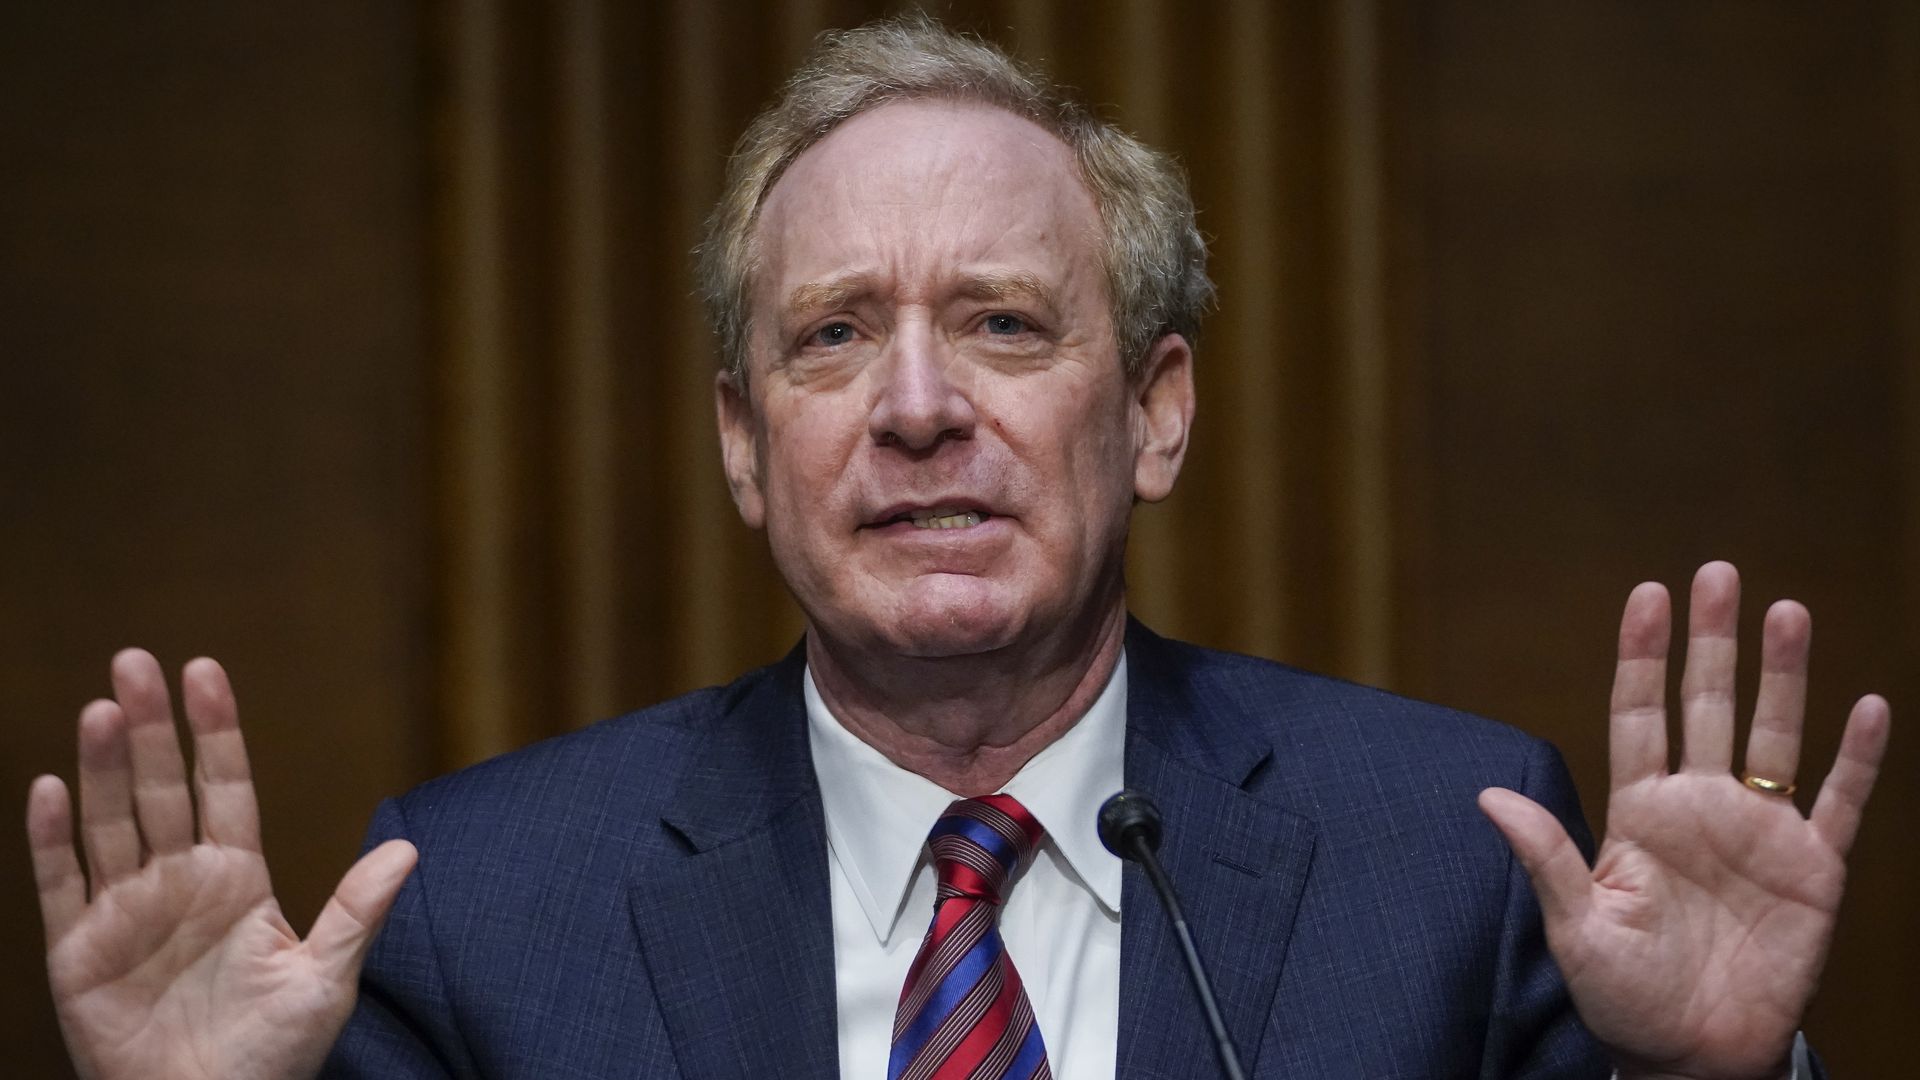 Microsoft President Brad Smith testifies during a Senate Intelligence Committee hearing last month. Photo: Drew Angerer/Getty Images)